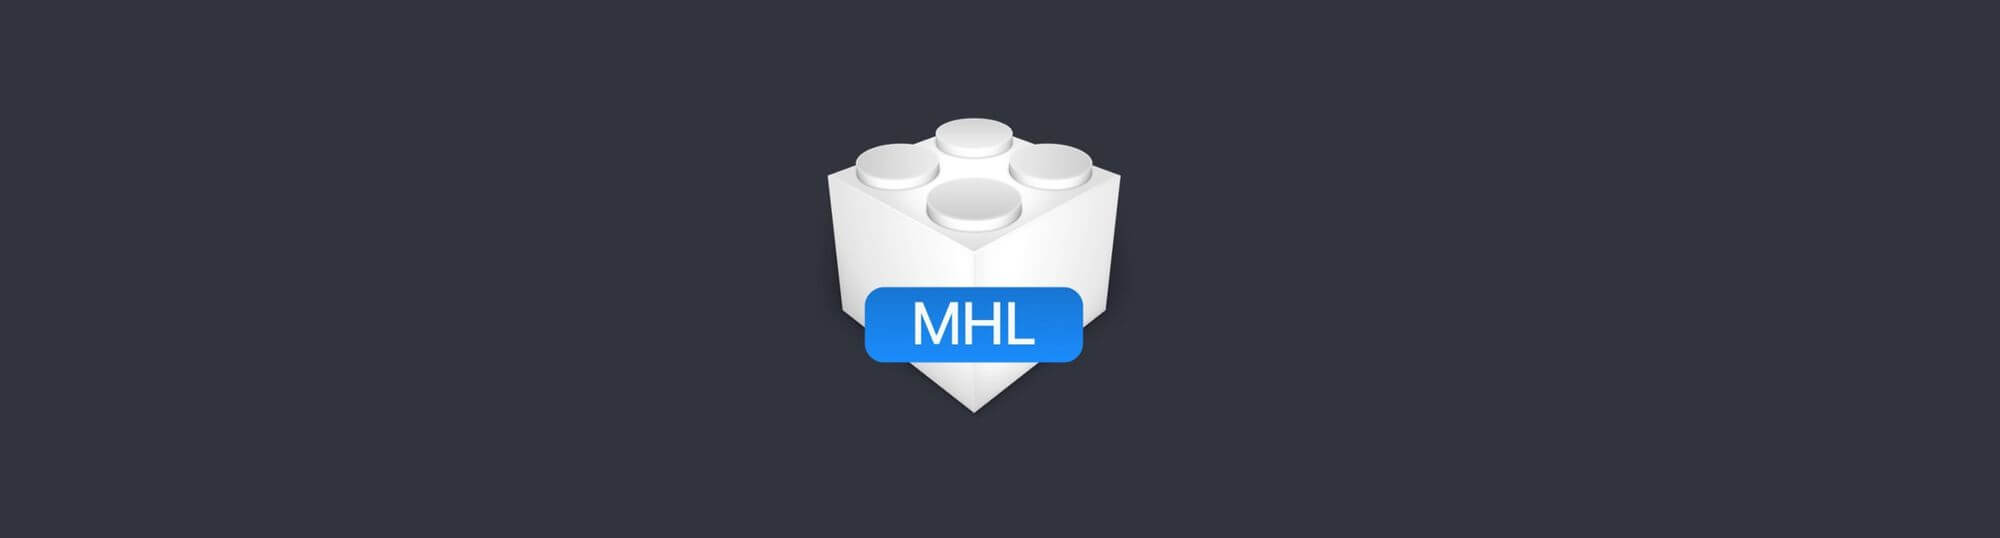 Making more use of MHL files